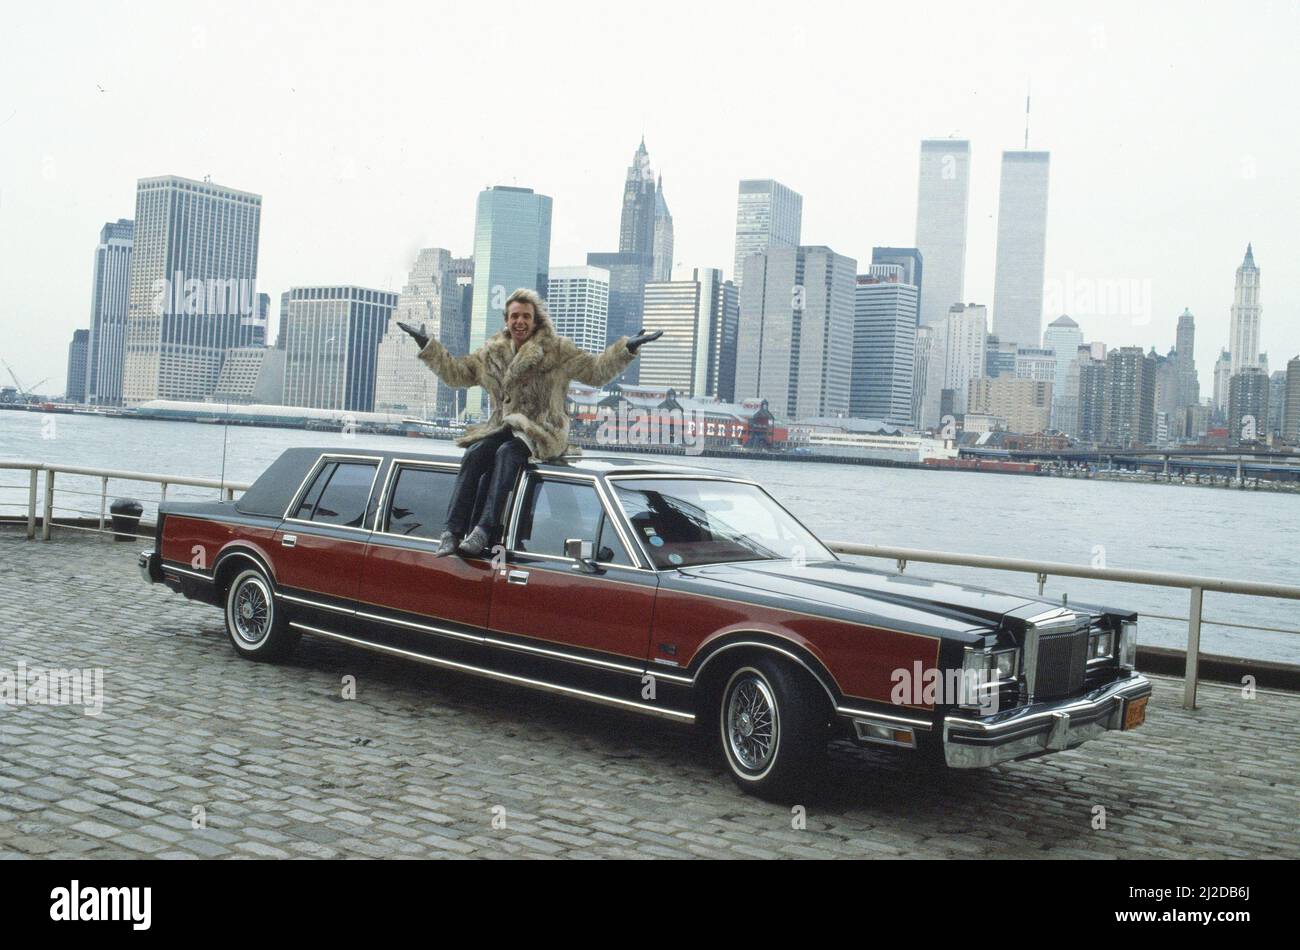 Peter Stringfellow, nightclub owner pictured in New York in January 1986, where Peter is opening Stringfellows New York.  He is sitting on a 45,000 dollar Lincoln Continental car with the Twin Towers of New York Manhattan in the background, 14th January 1986 Stock Photo